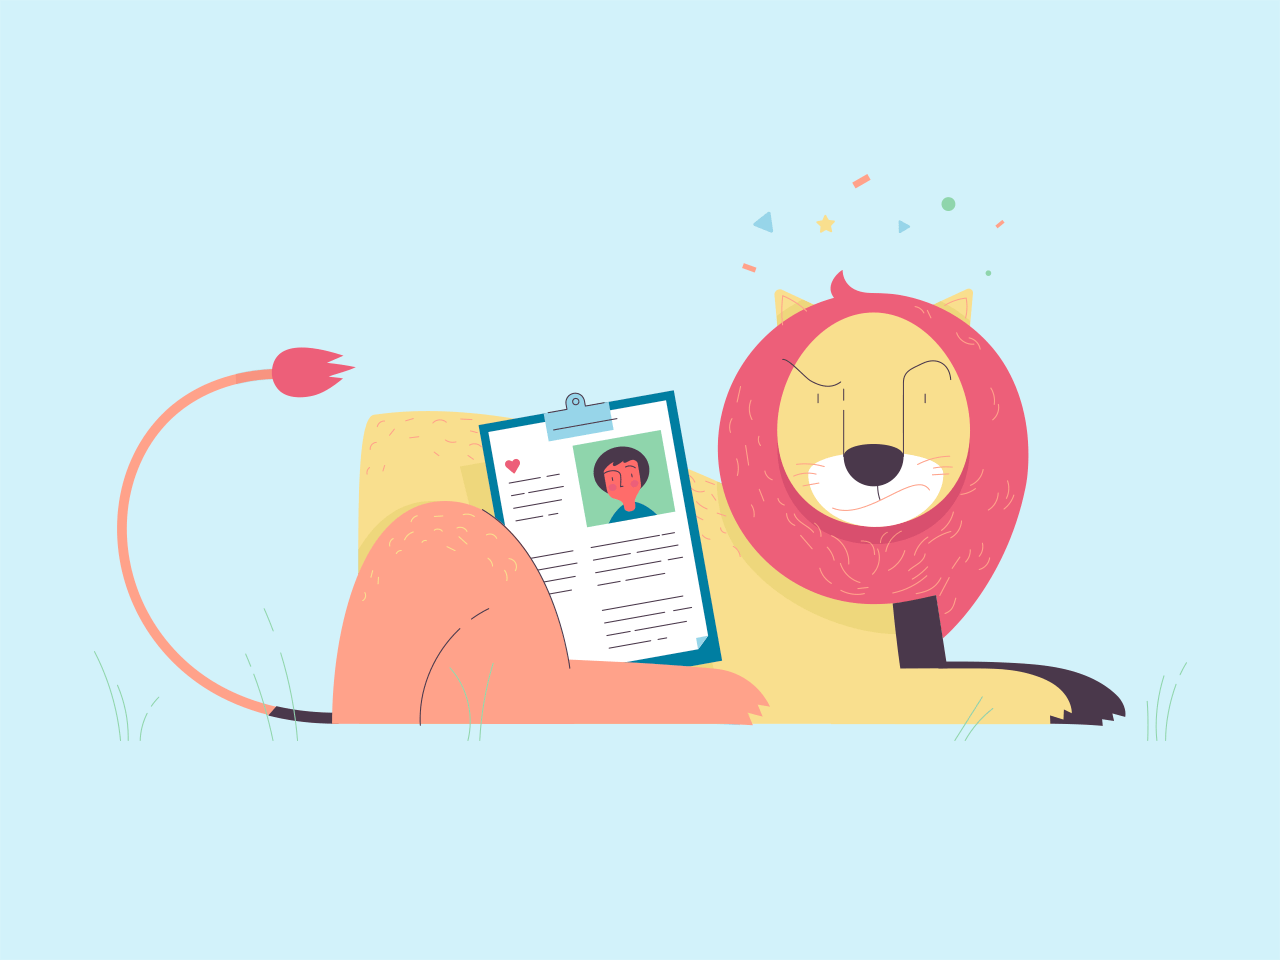 Ilustration of a lion guarding a clipboard with patient information